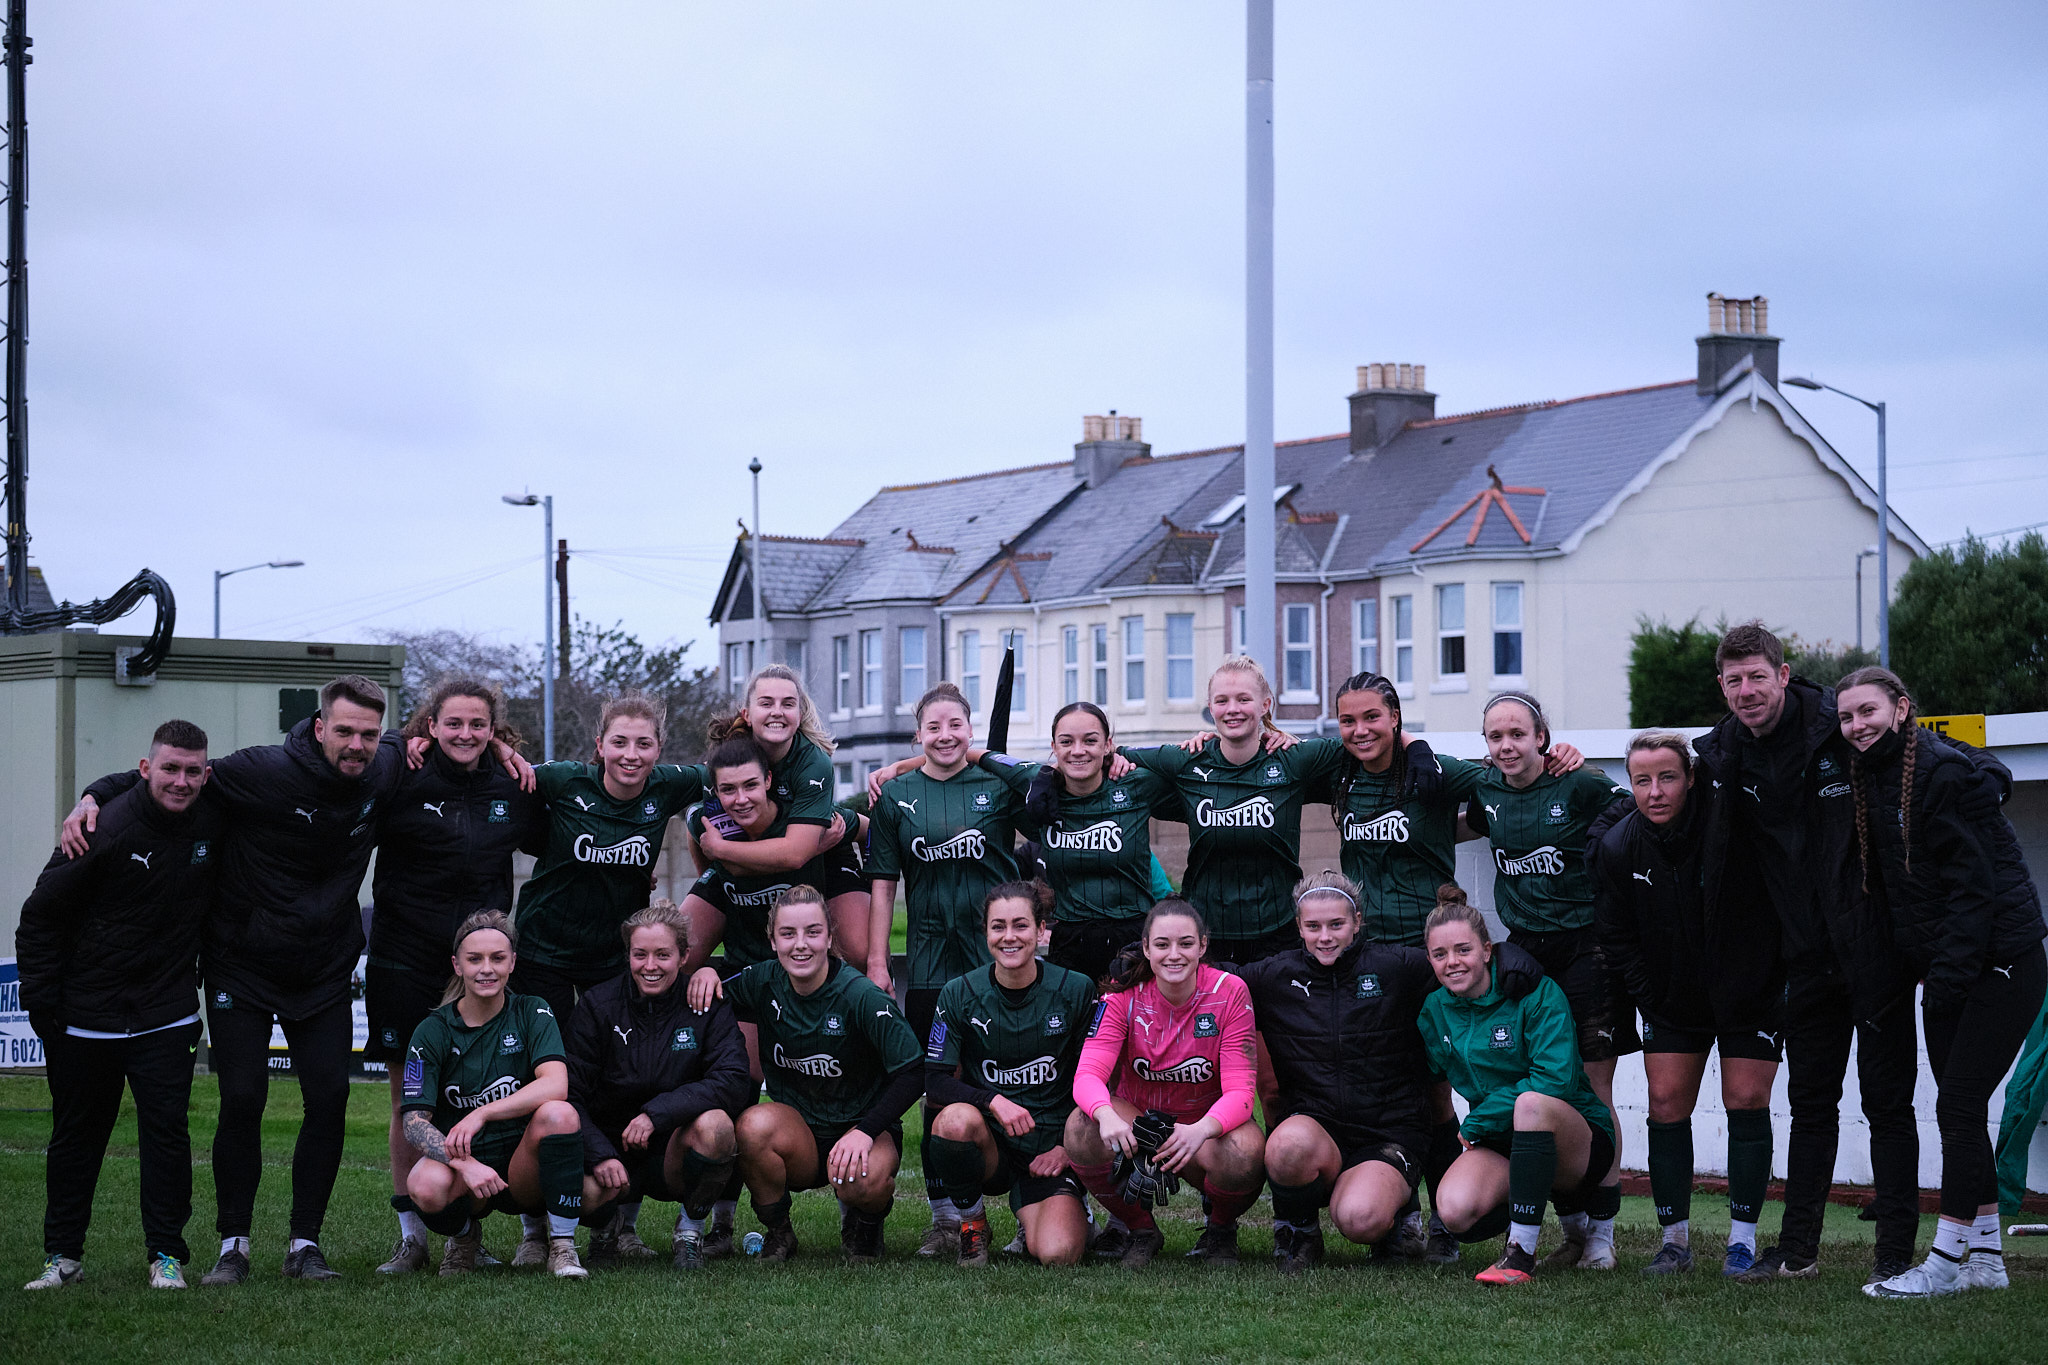 Argyle Women celebrate reaching the 4th round of the FA Cup